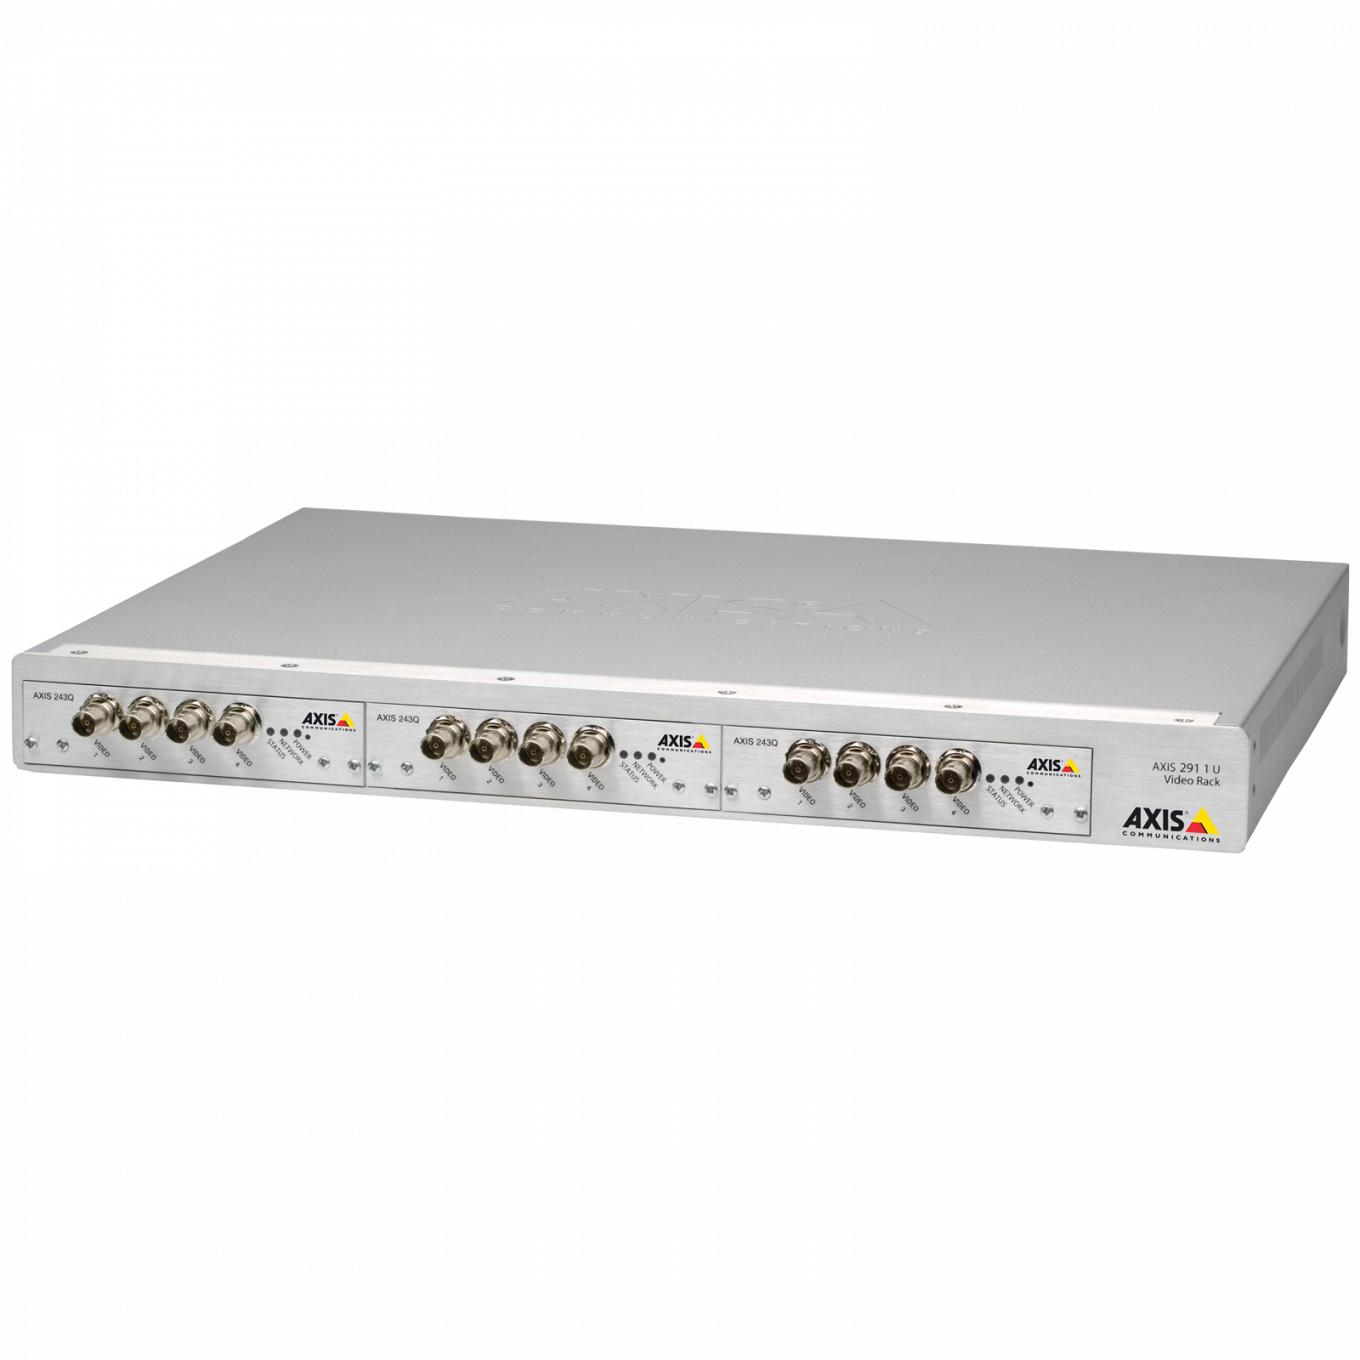 AXIS 291 1U Video Server rack from left angle